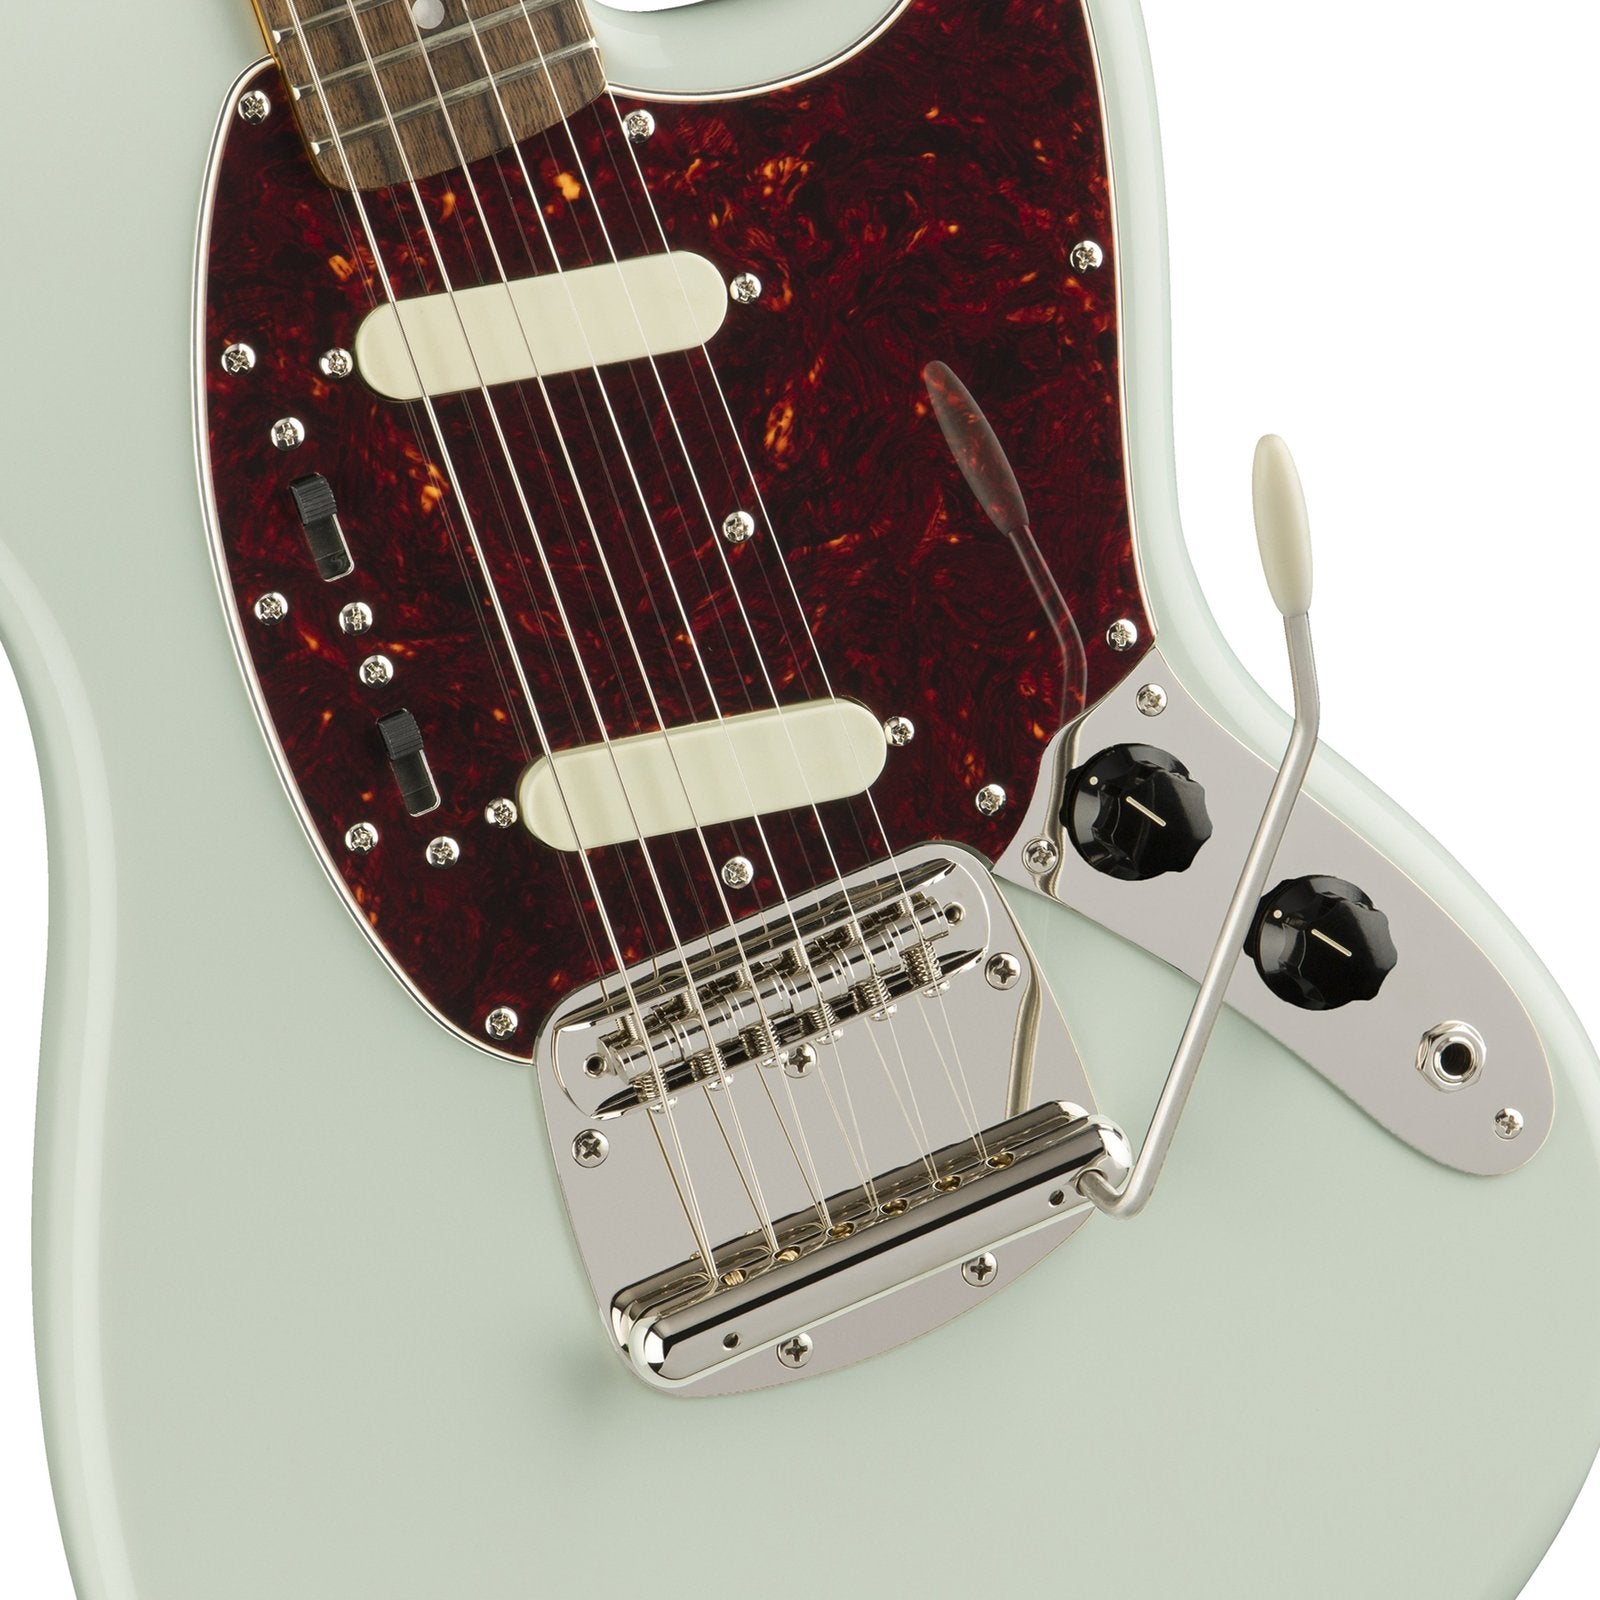 Squier Classic Vibe 60s Mustang Electric Guitar, Laurel FB, Sonic Blue, SQUIER BY FENDER, ELECTRIC GUITAR, squier-by-fender-electric-guitar-037-4080-572, ZOSO MUSIC SDN BHD